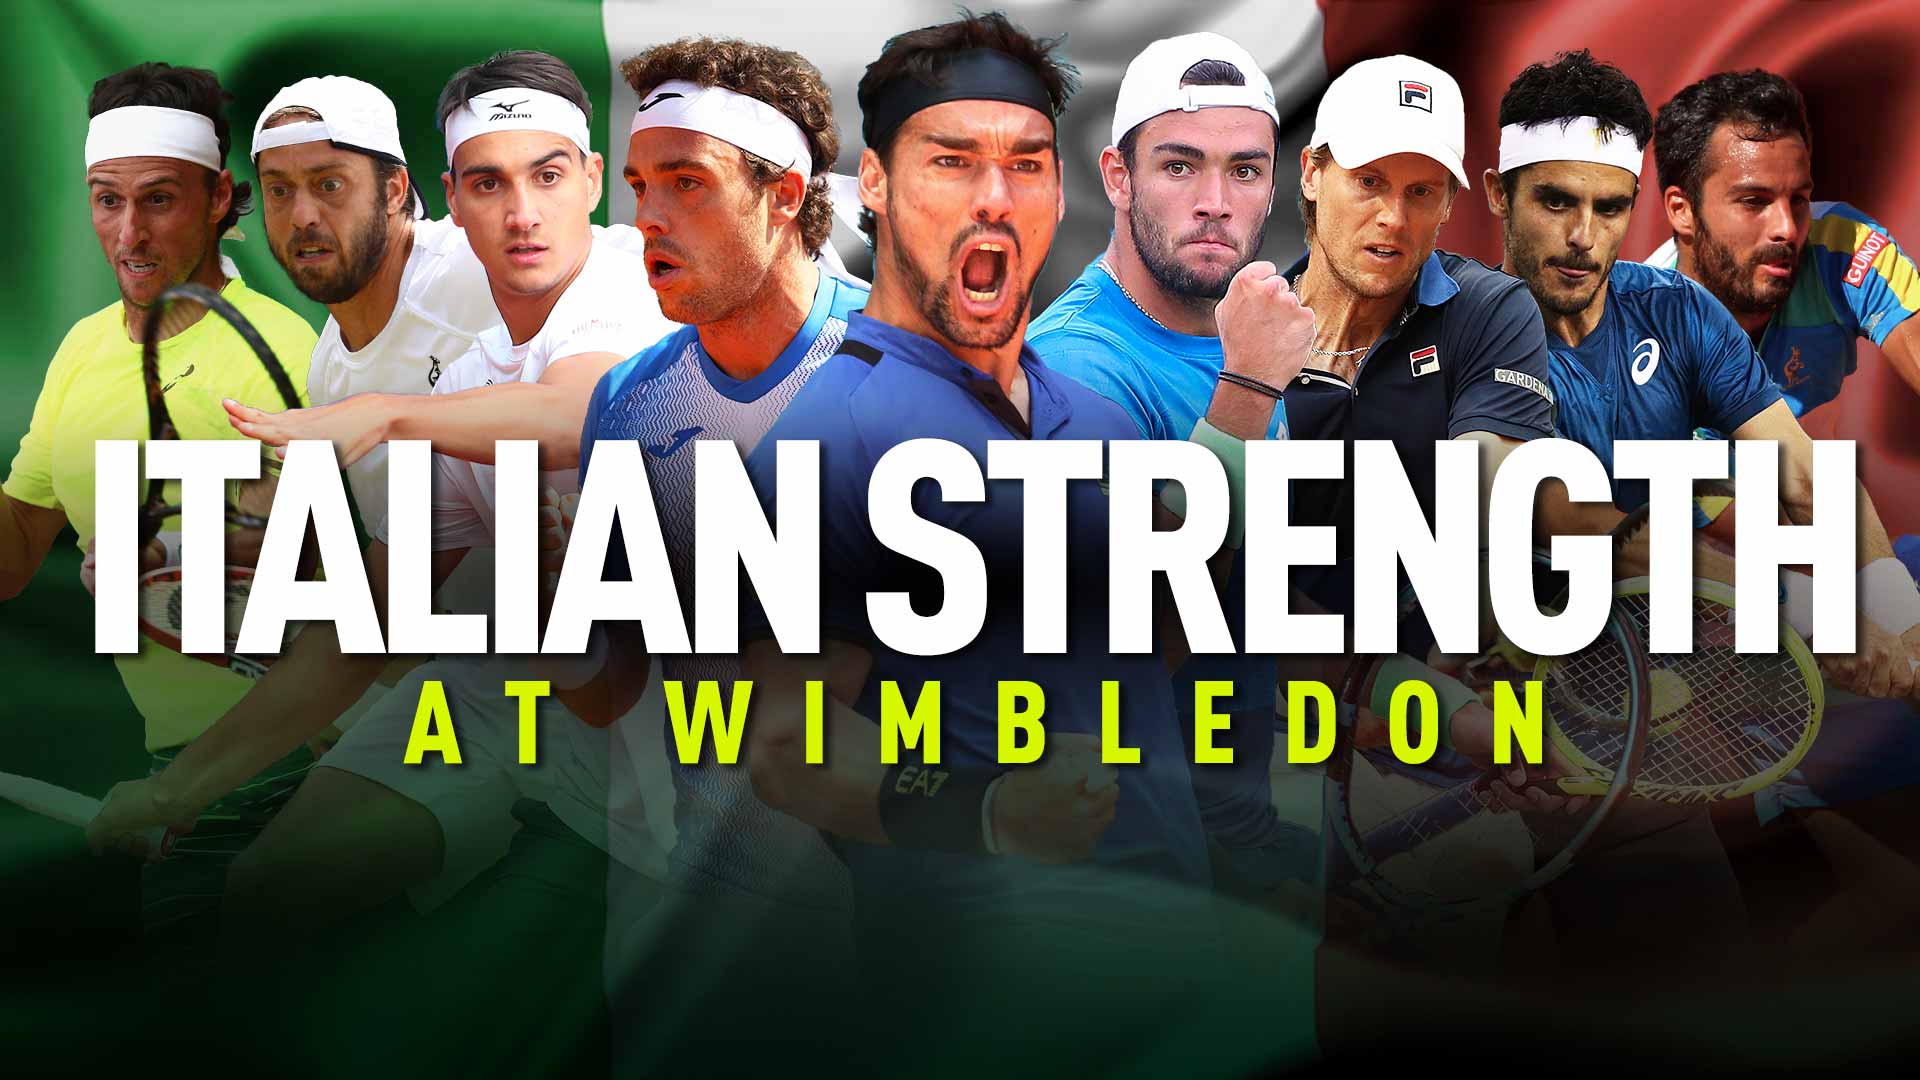 <a href='https://www.atptour.com/en/players/fabio-fognini/f510/overview'>Fabio Fognini</a> leads the Italian charge in the <a href='https://www.atptour.com/en/tournaments/wimbledon/540/overview'>Wimbledon</a> main draw this year.